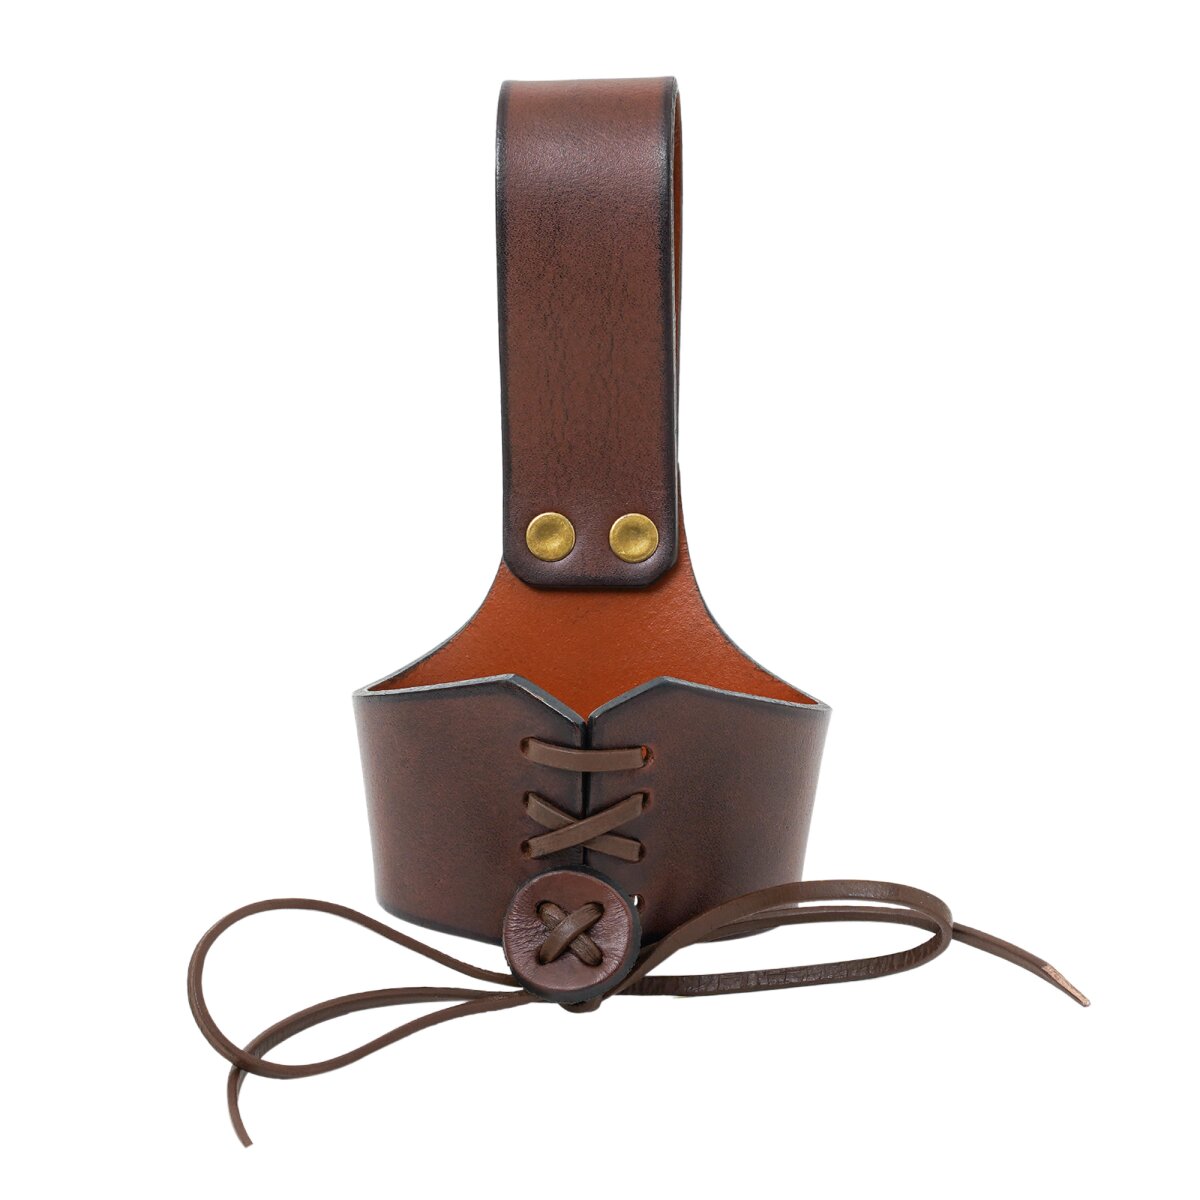 Handcrafted Genuine Leather Horn Holders for Drinking...